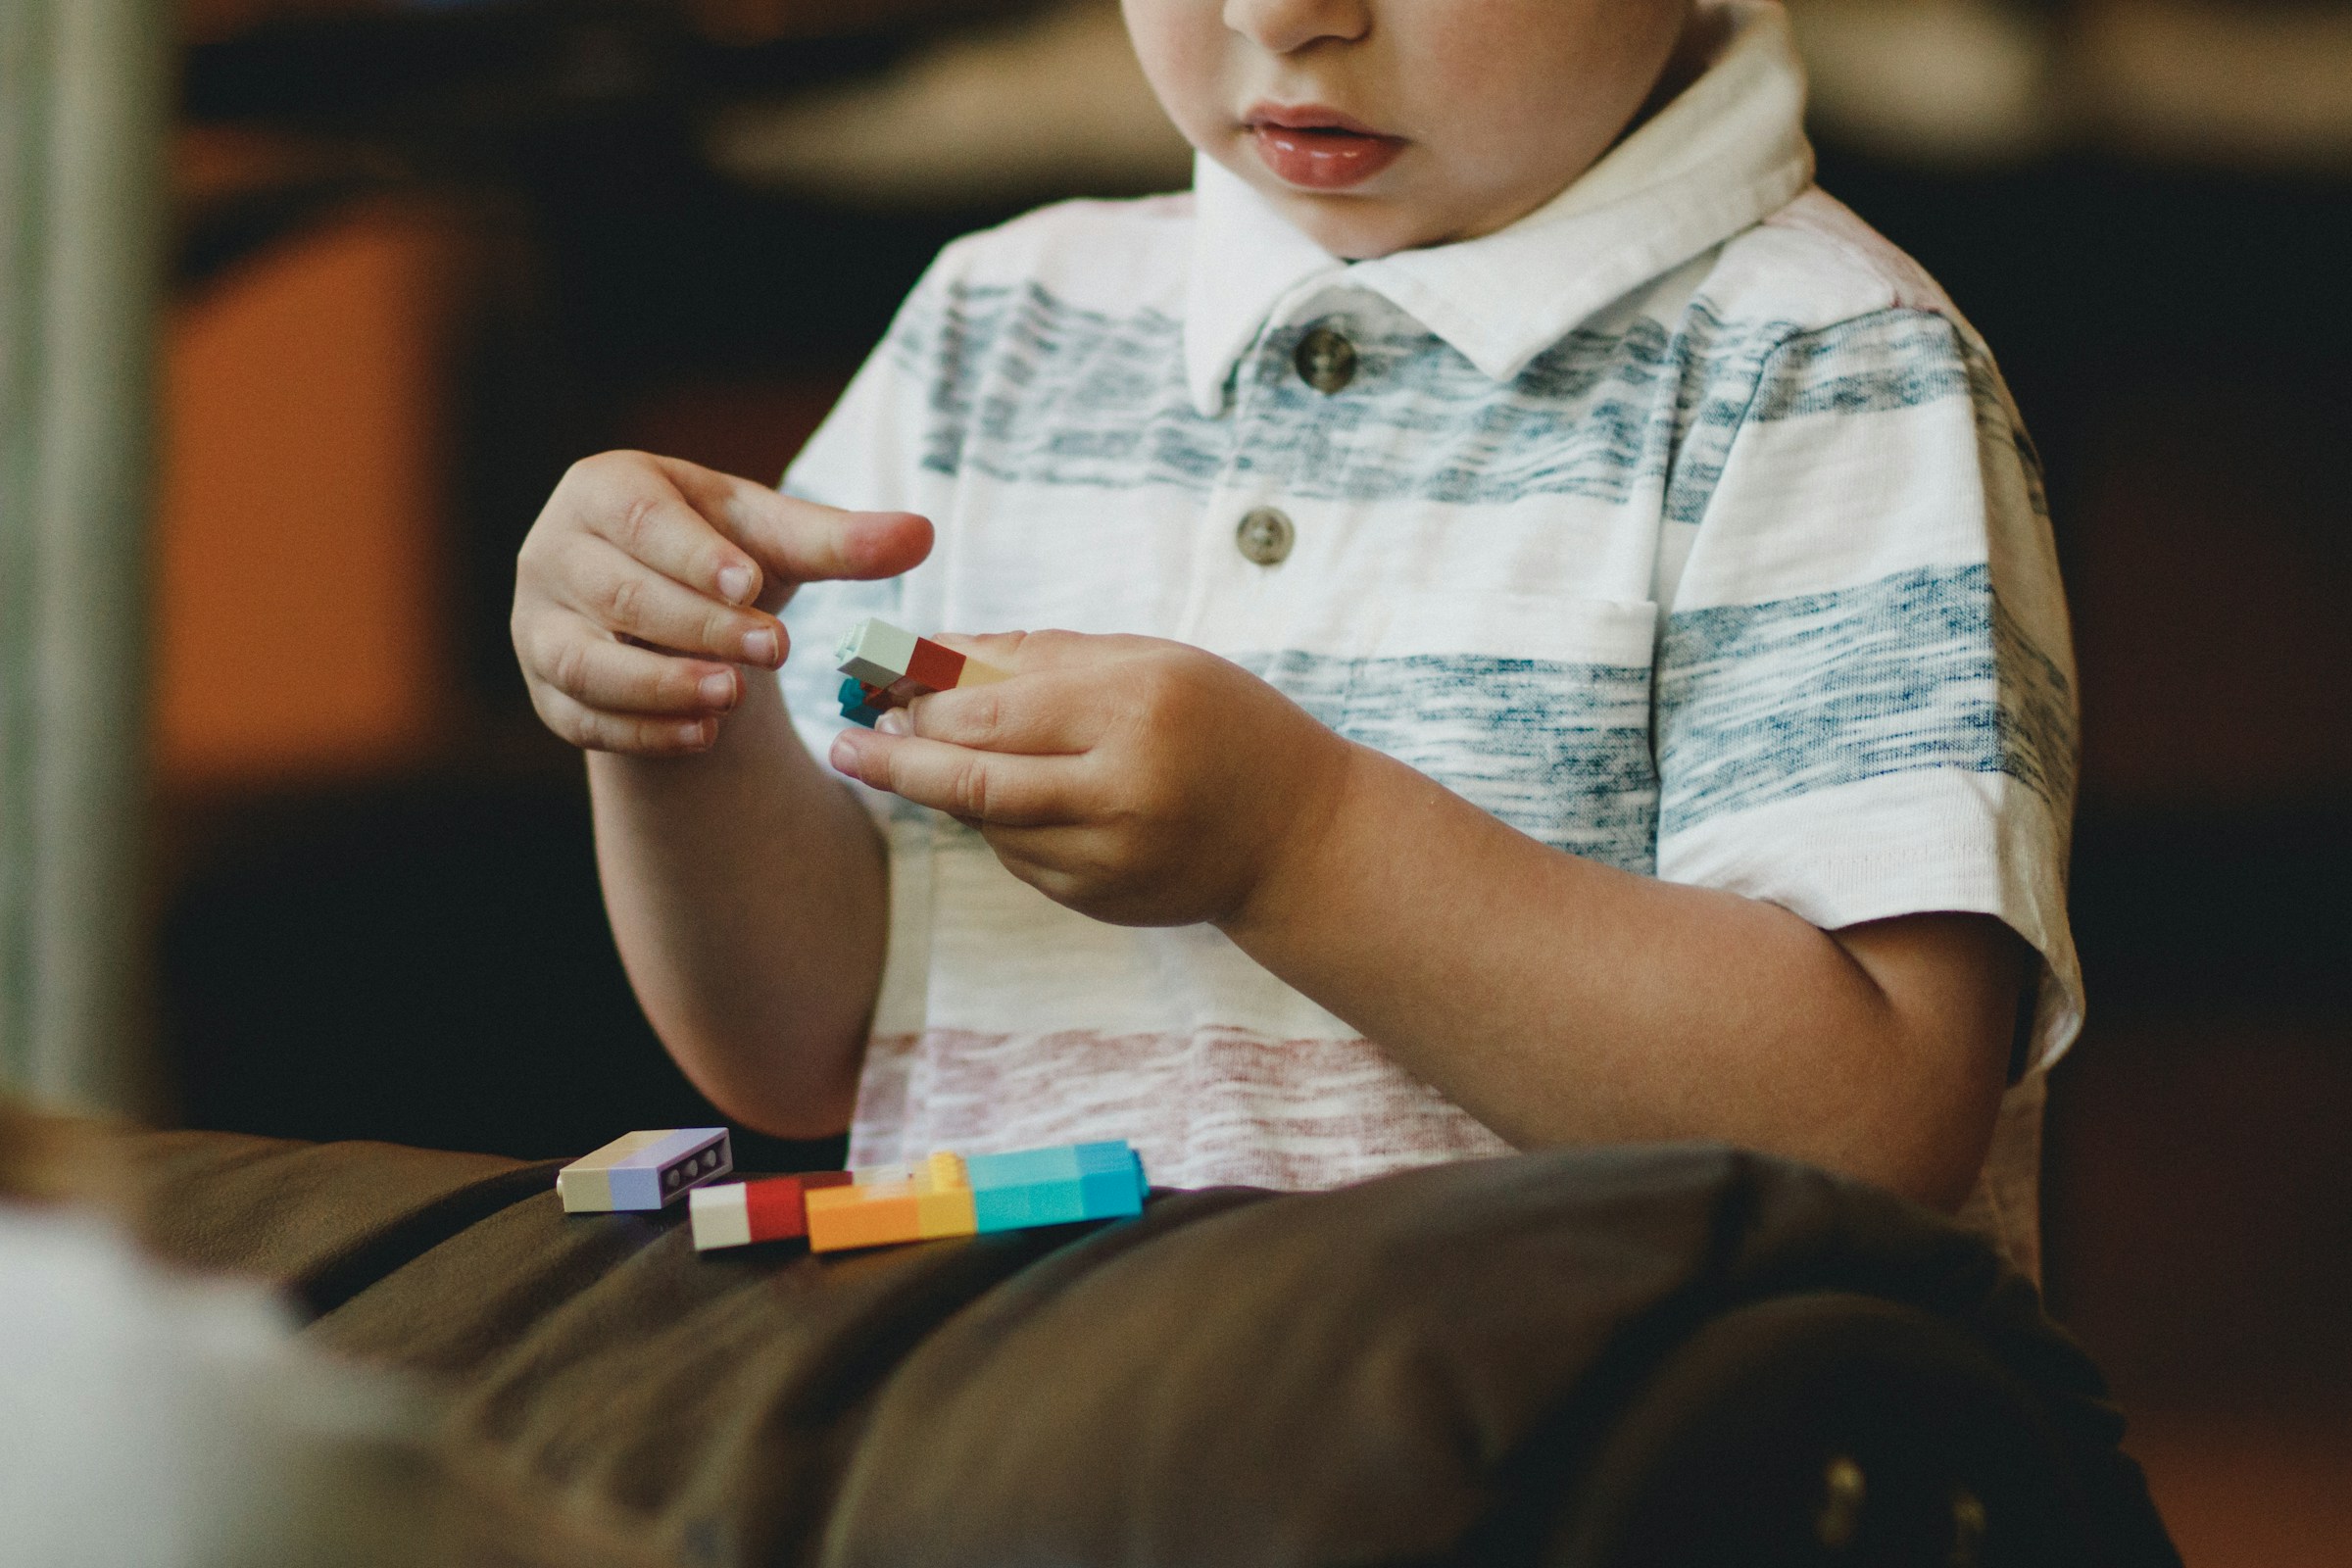 A little boy playing with building blocks | Source: Unsplash